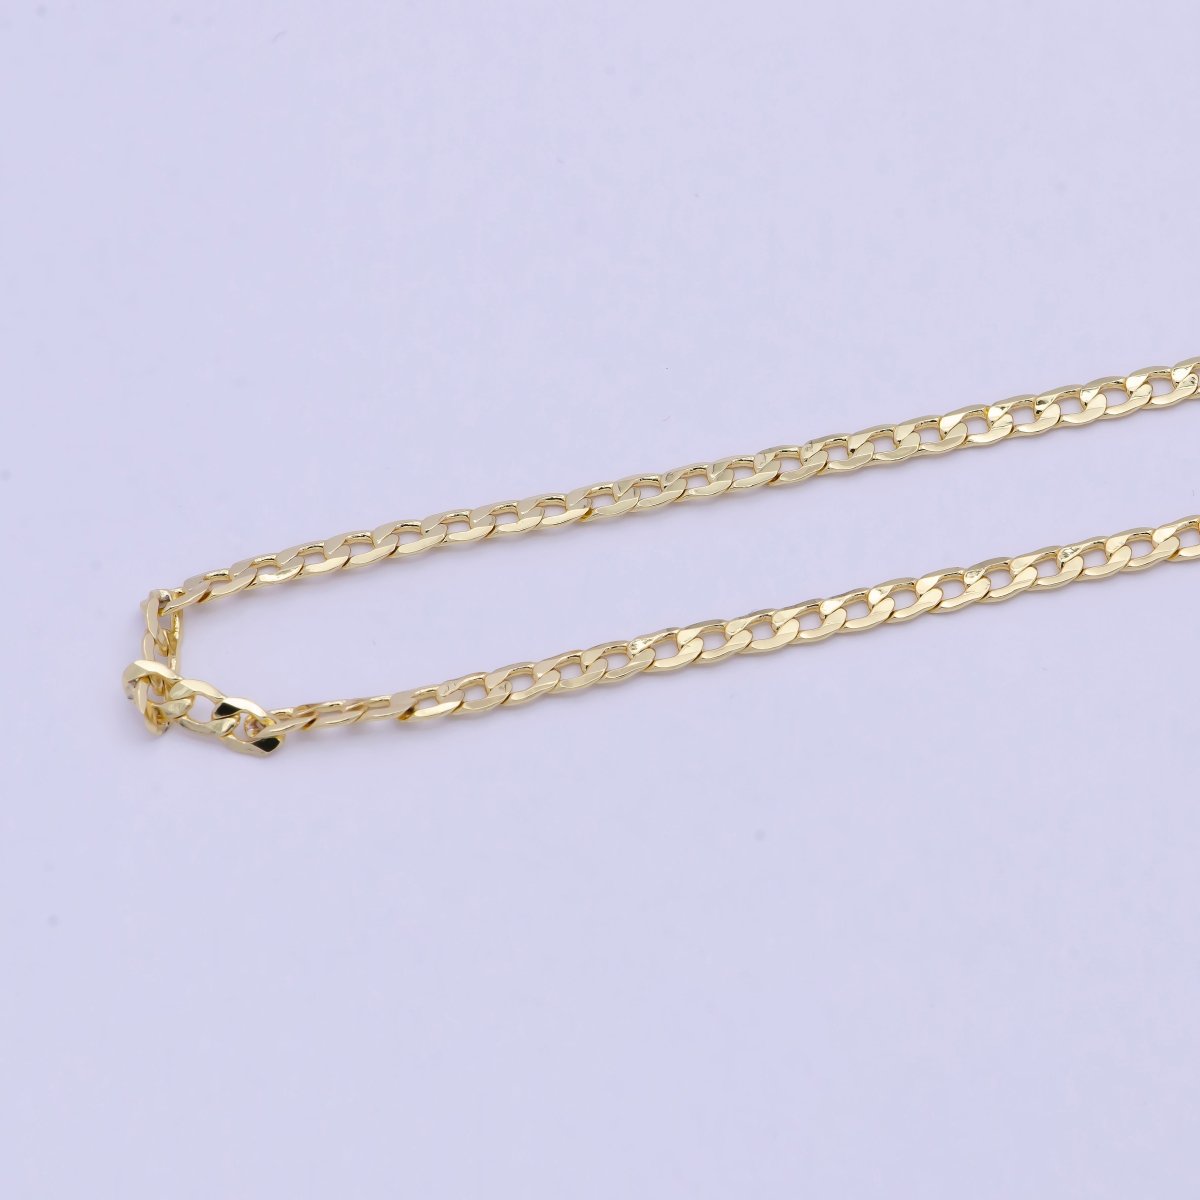 Dainty 24K Gold Filled Flat Curb Chain by Yard, Unfinished Miami Curb Chain For Jewelry Making | ROLL-736 Clearance Pricing - DLUXCA